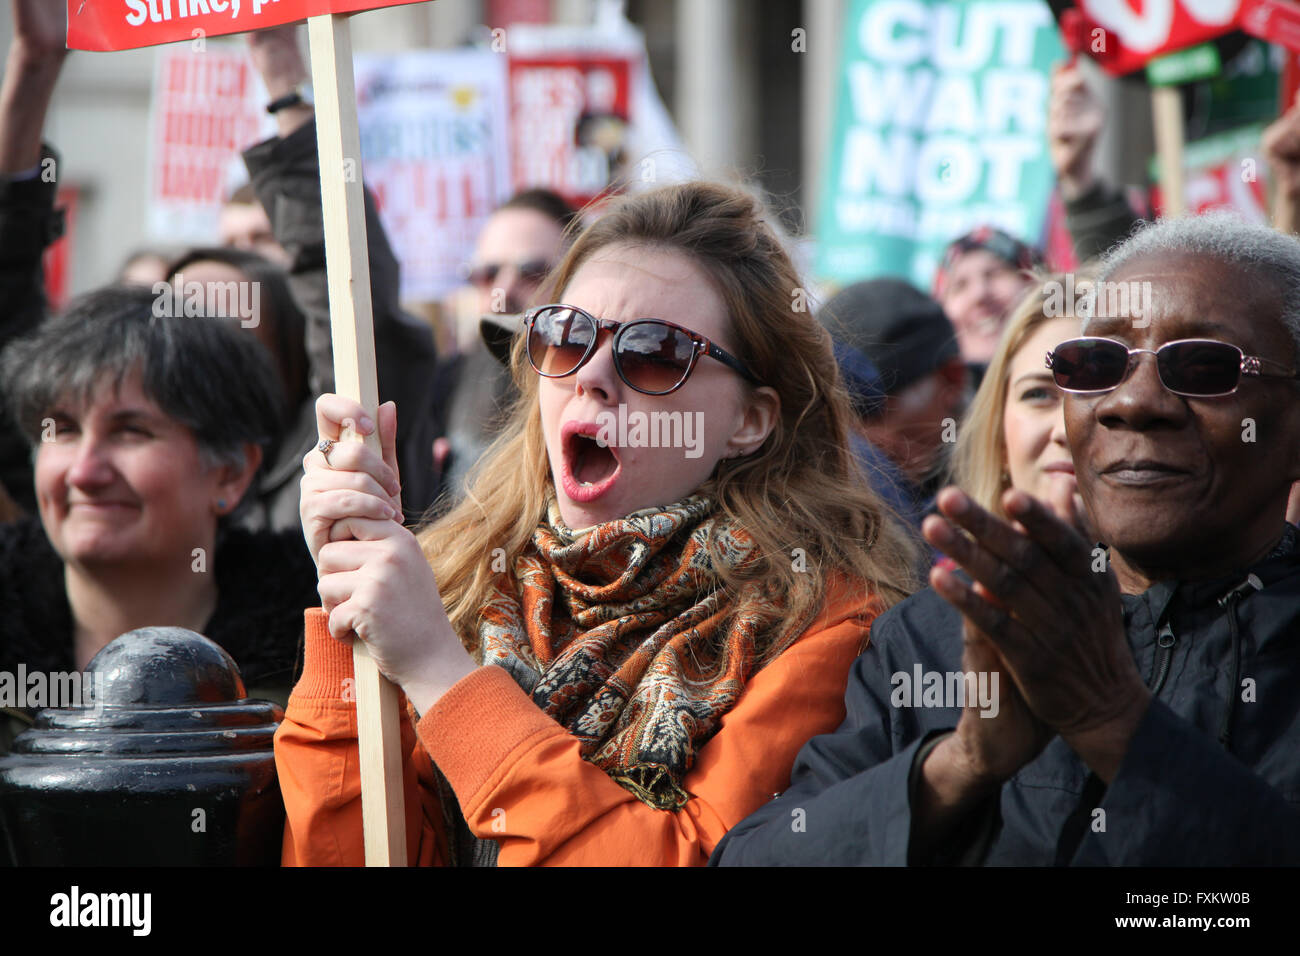 London, 16 April 2016 - Thousands of protesters take part in The People's Assembly's national demonstration by marching in London and rallying in Trafalgar Square against the government's programme of cuts in NHS, homes, job, welfare and education Credit:  Dinendra Haria/Alamy Live News Stock Photo